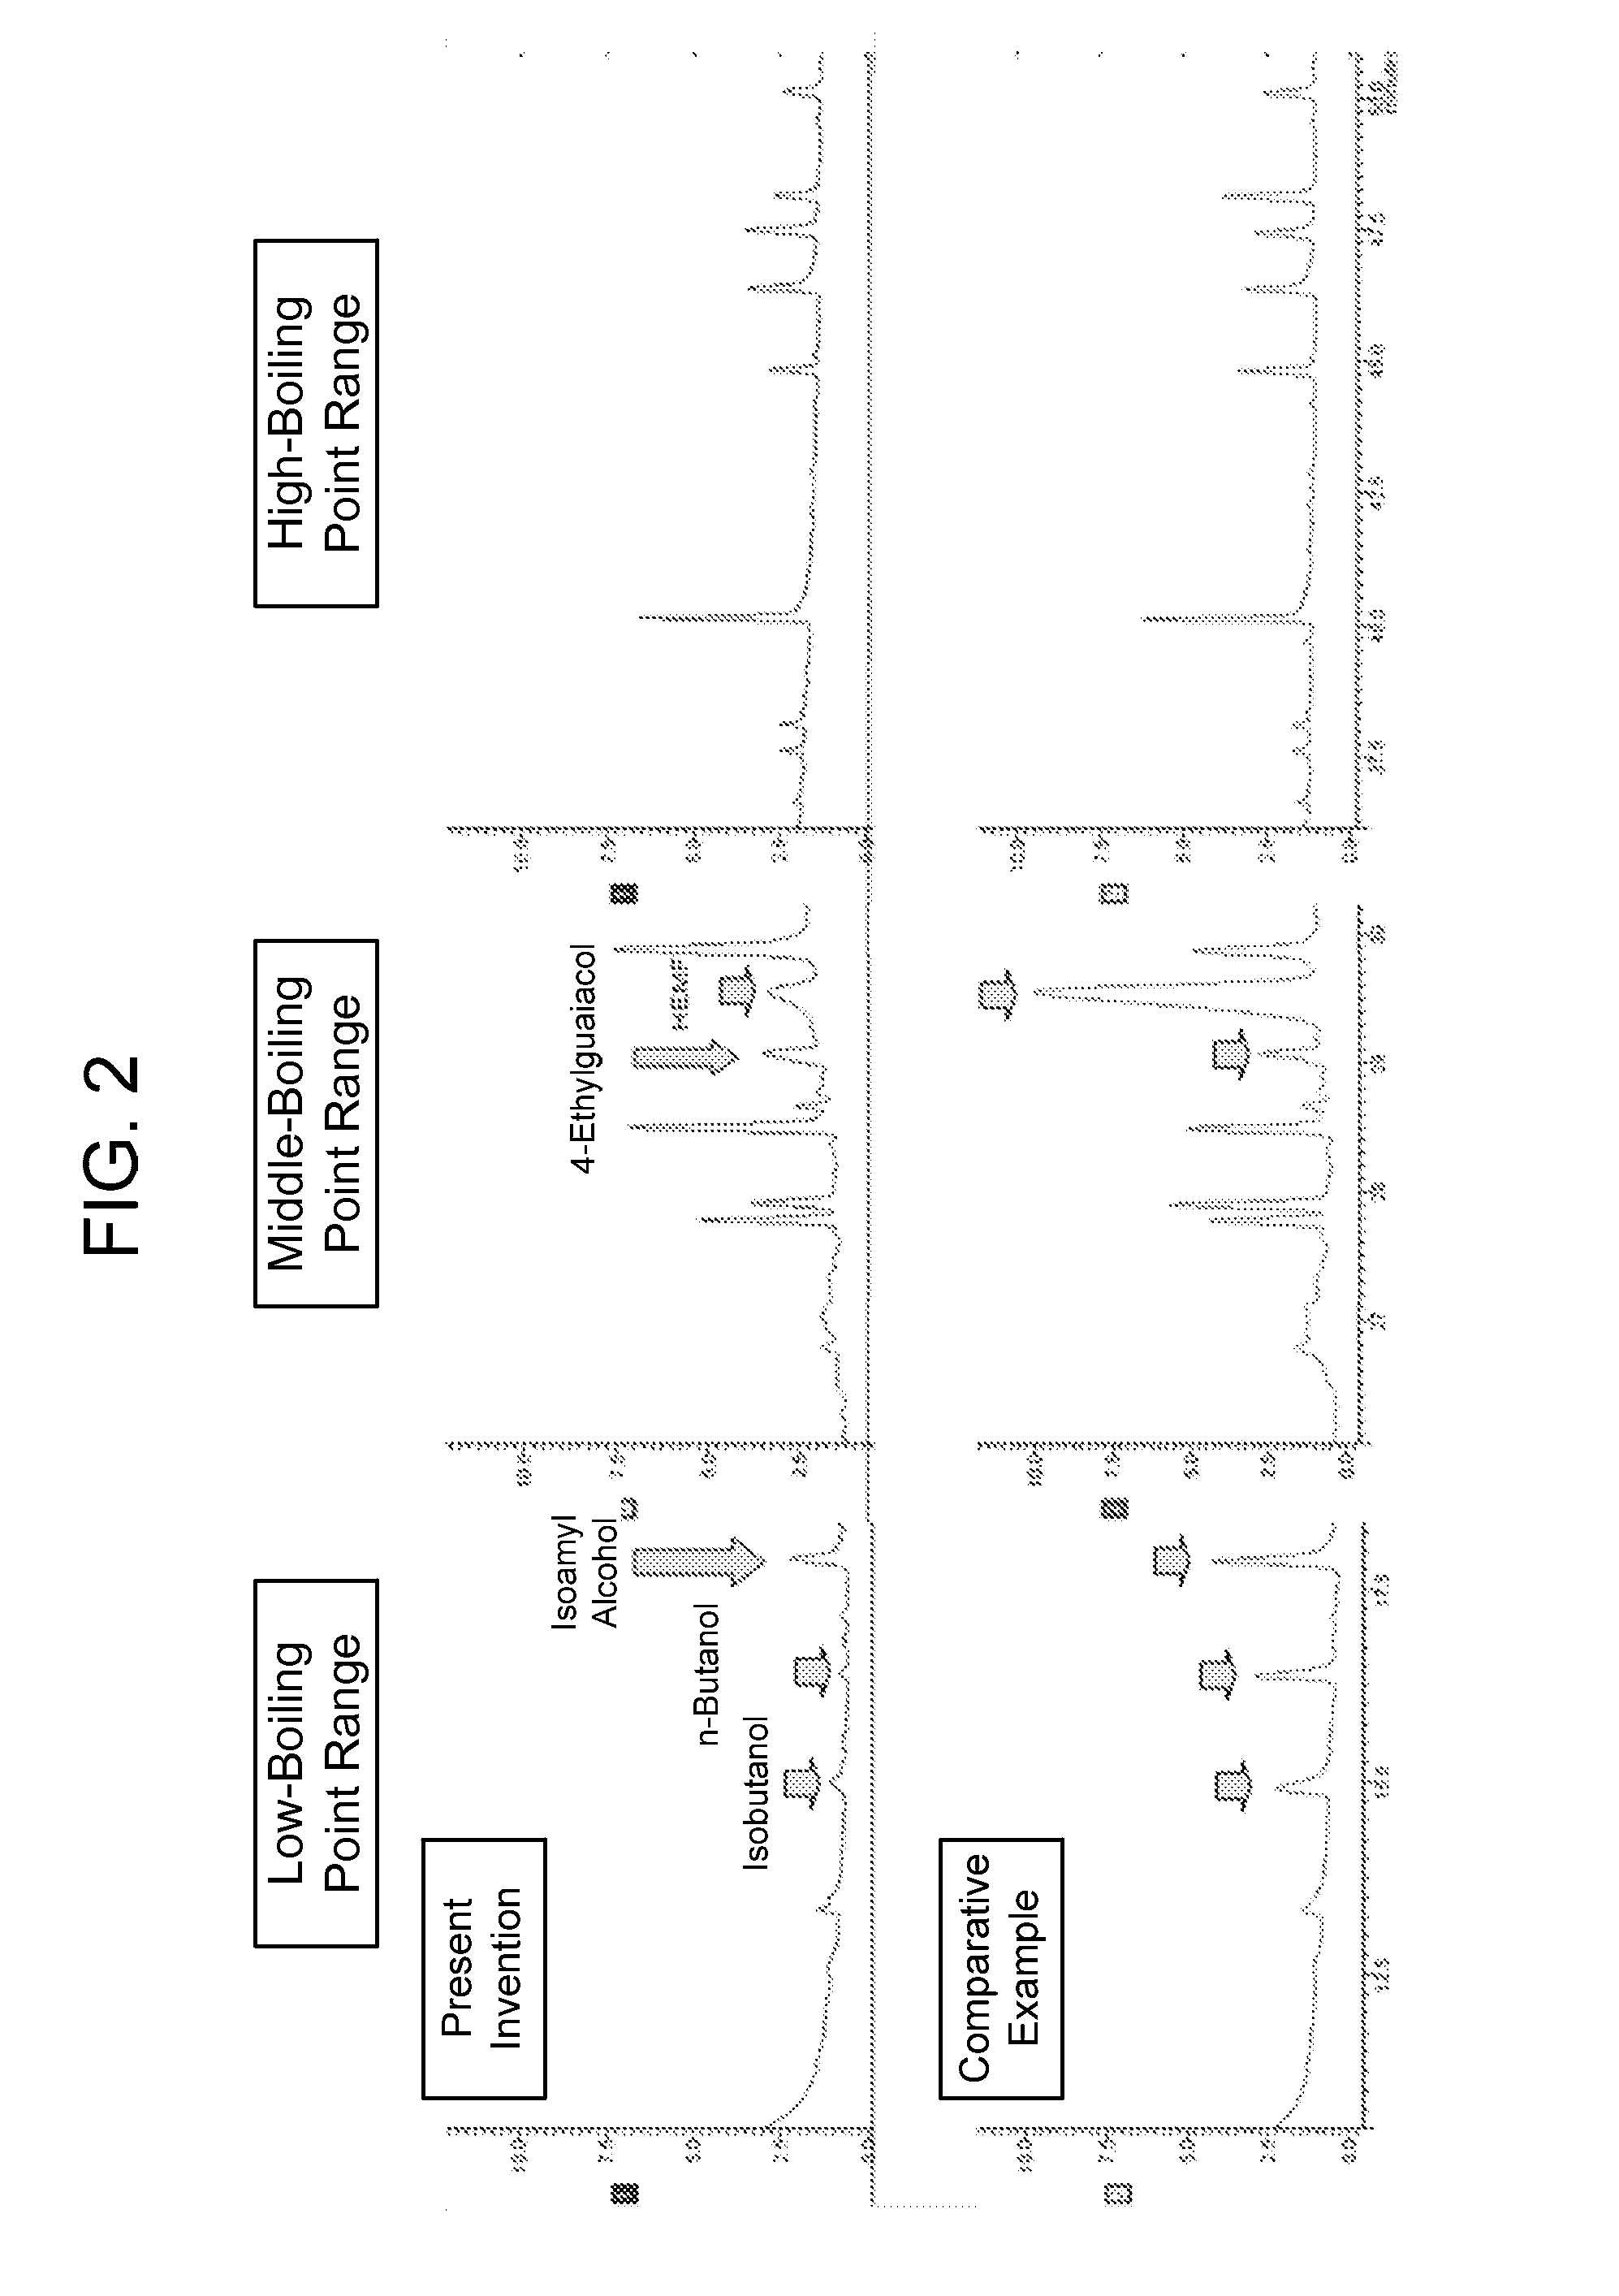 Brewed soy sauce and method of producing the brewed soy sauce